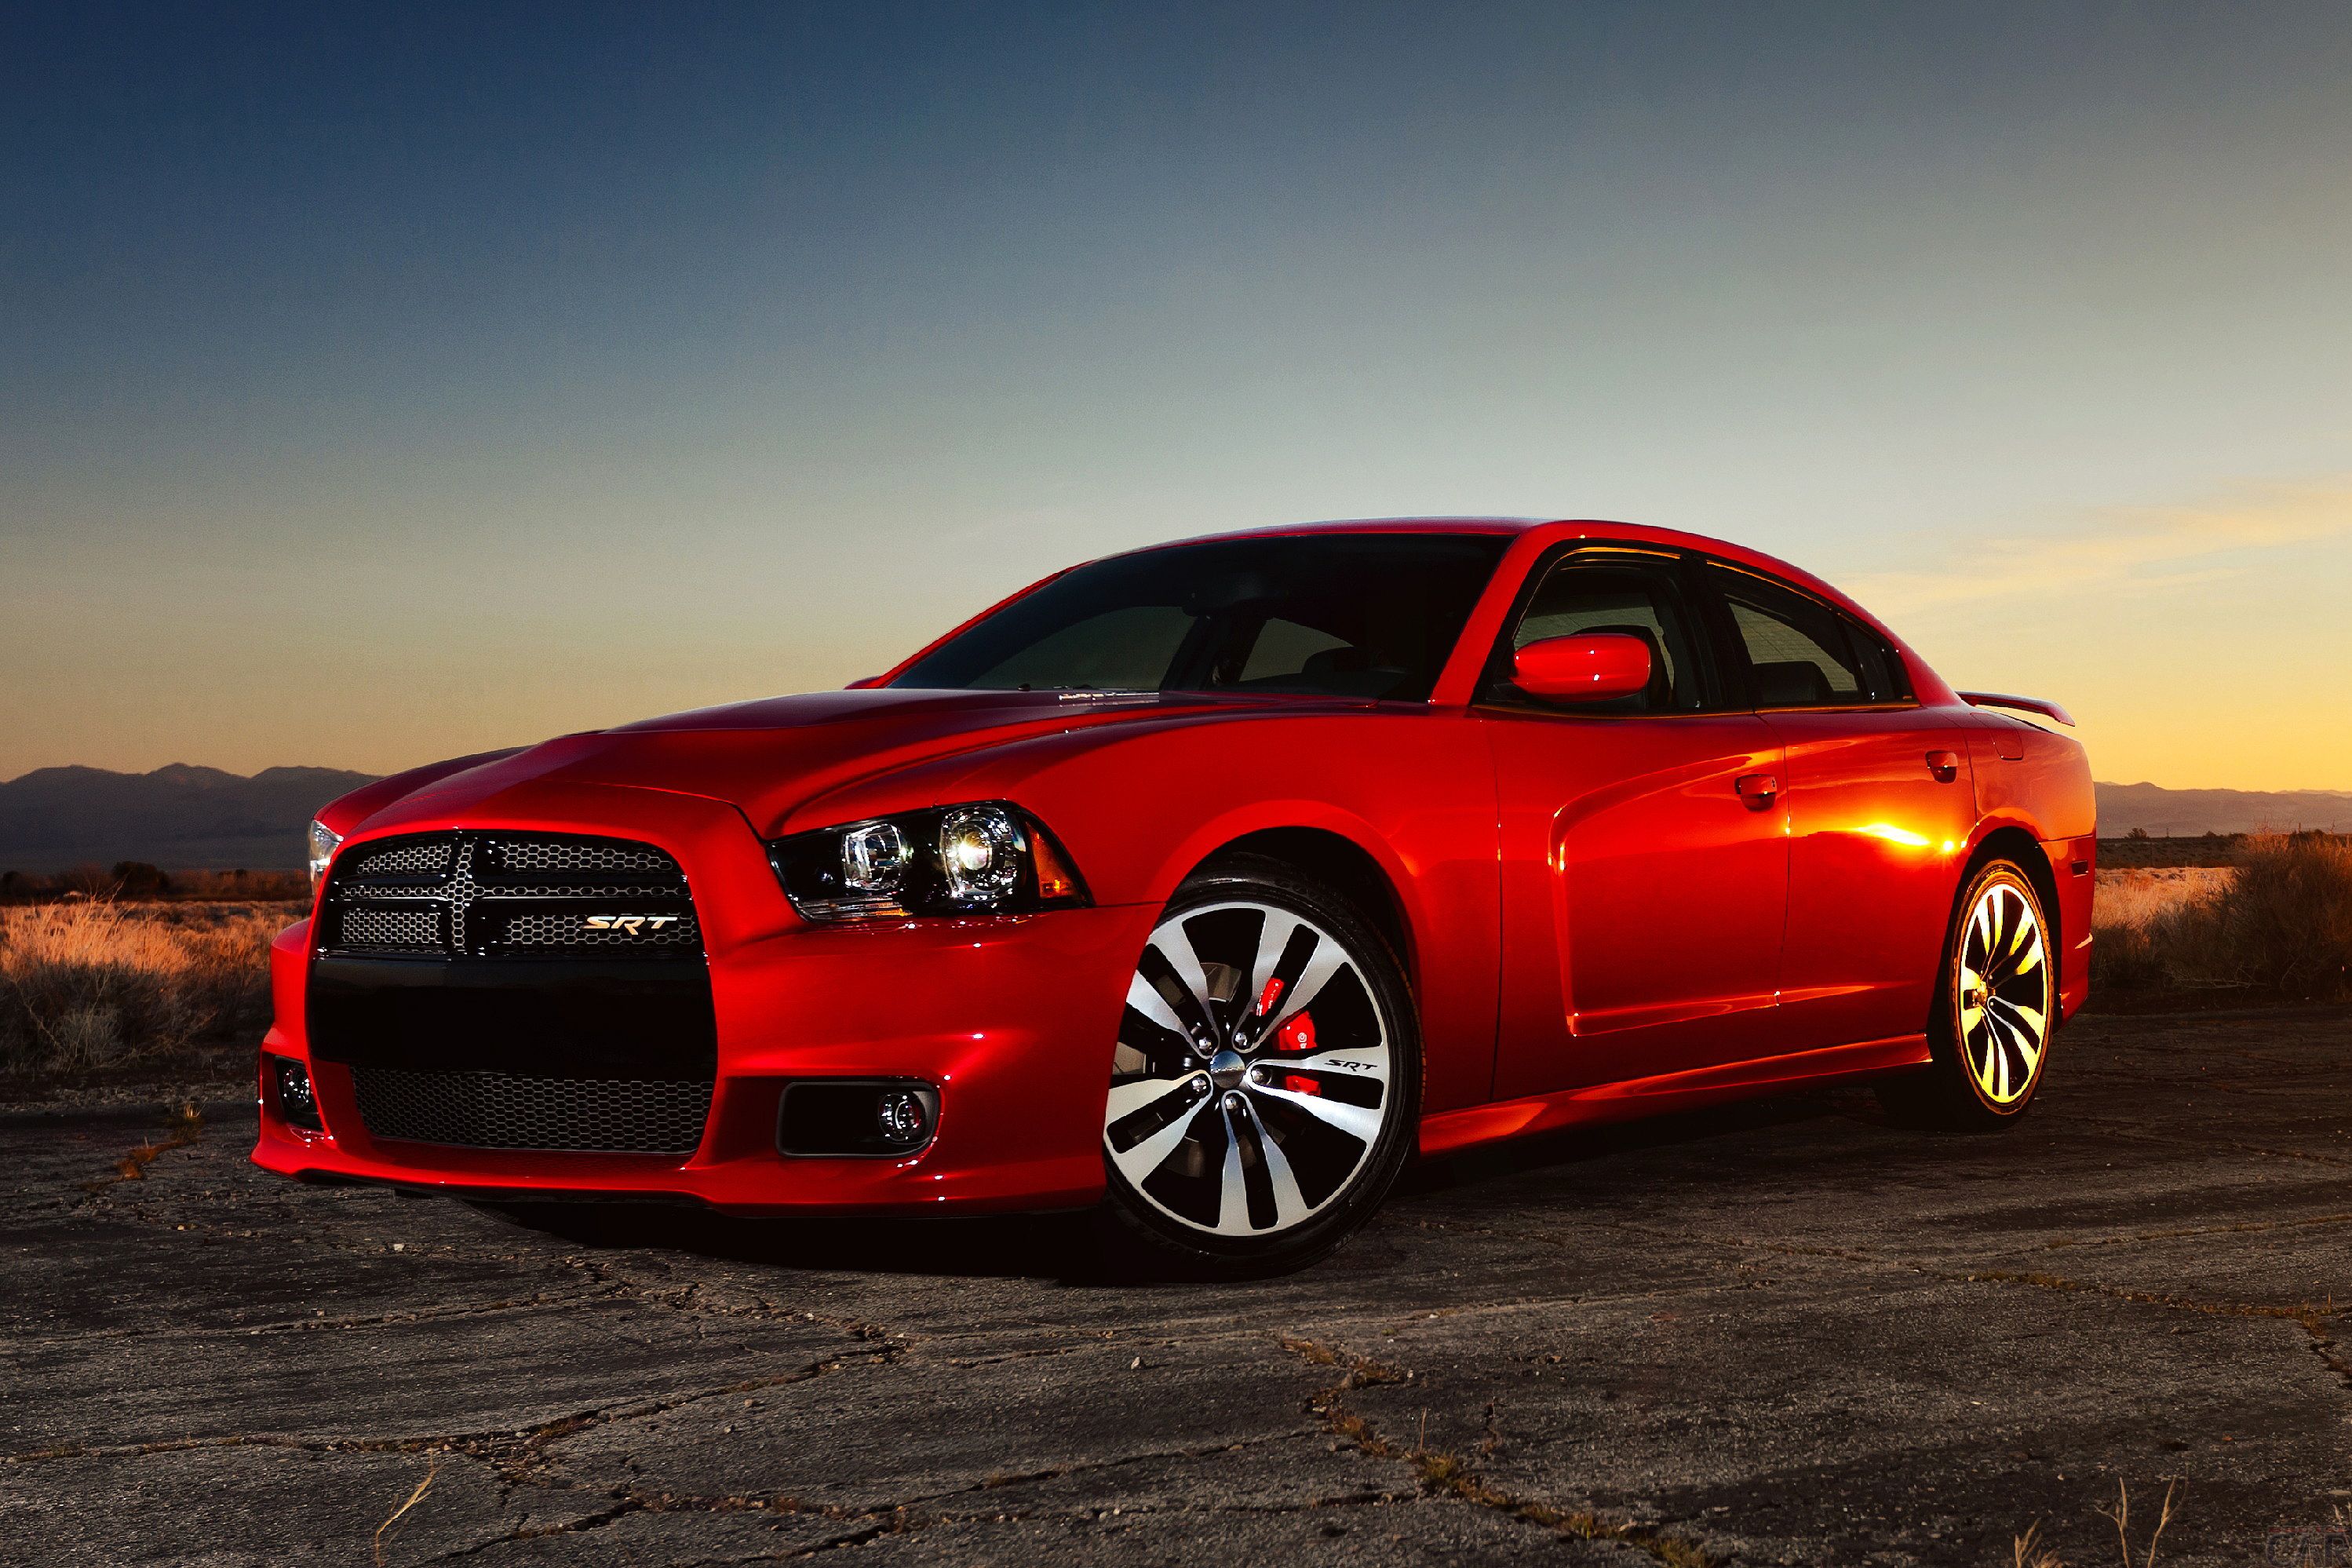 Cool Dodge Charger Beautiful Wallpaper Tuned Cars For Mobile Phones